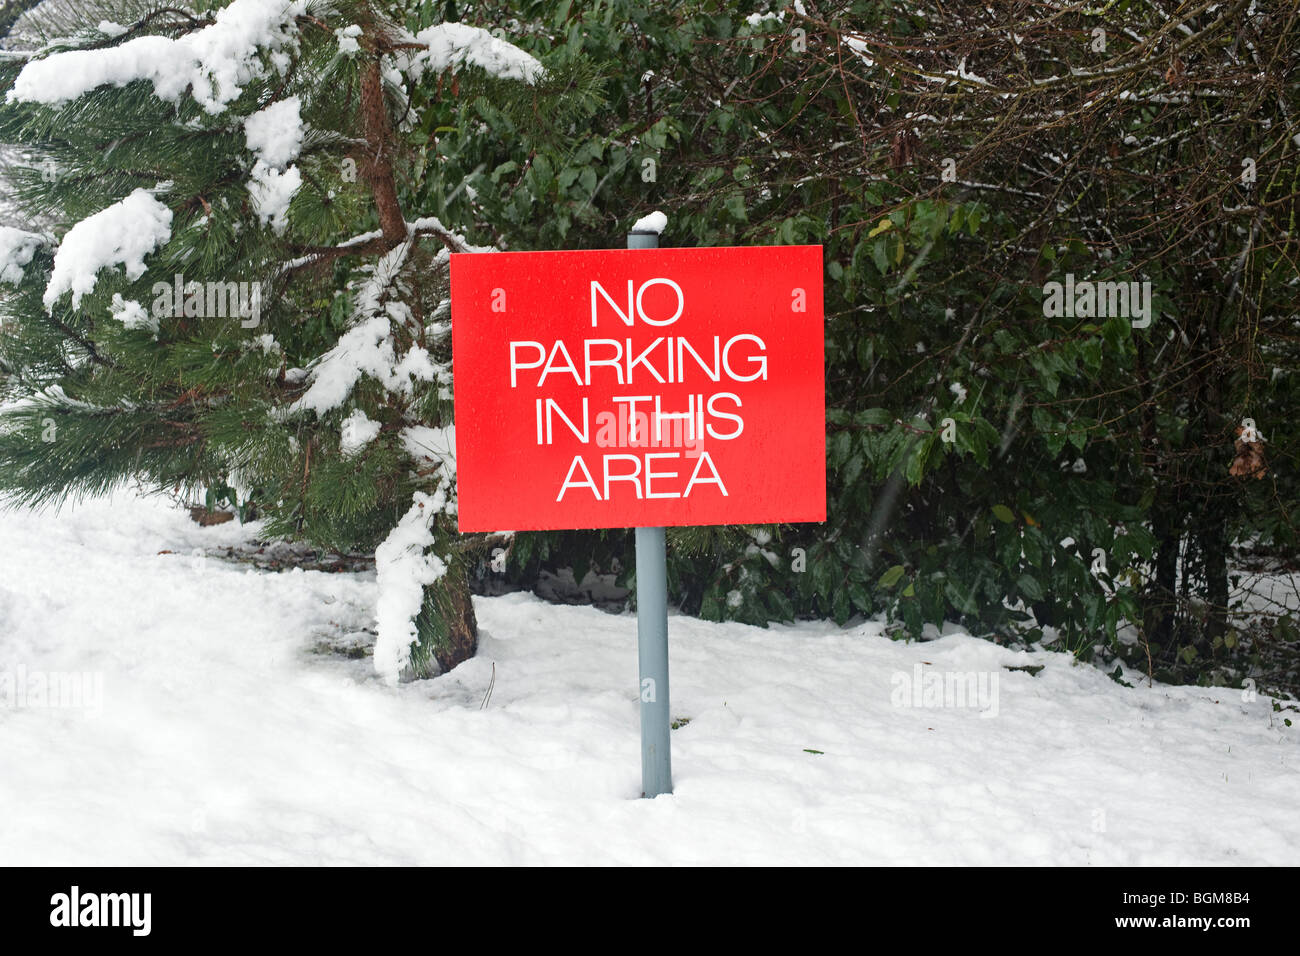 No parking sign in snow Banque D'Images